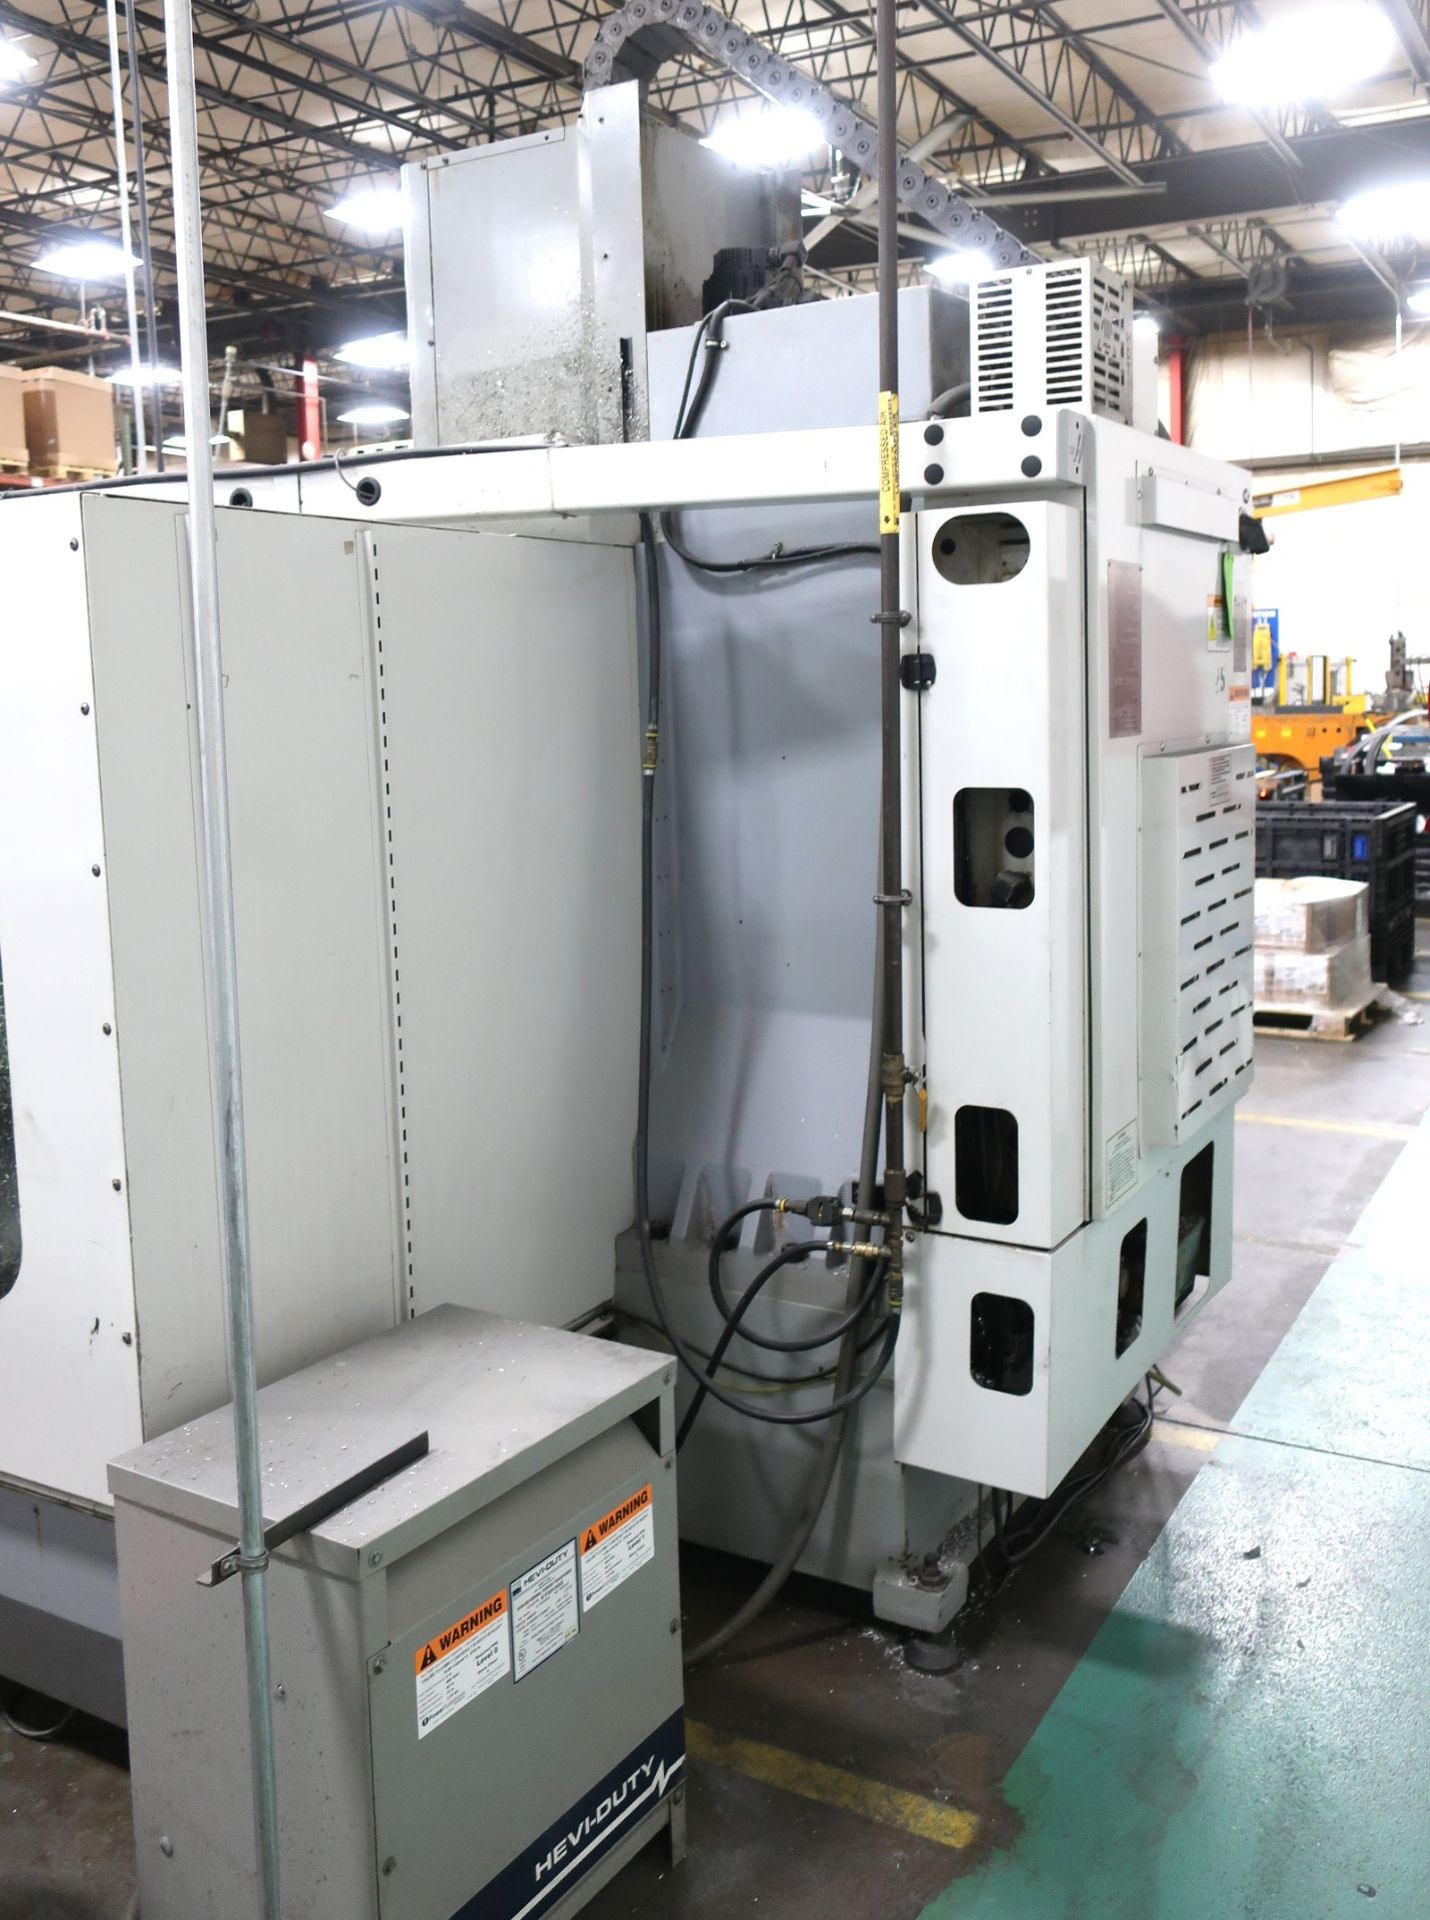 HAAS MODEL VF-3 CNC VERTICAL MACHINING CENTER, NEW 2005 - Image 10 of 21